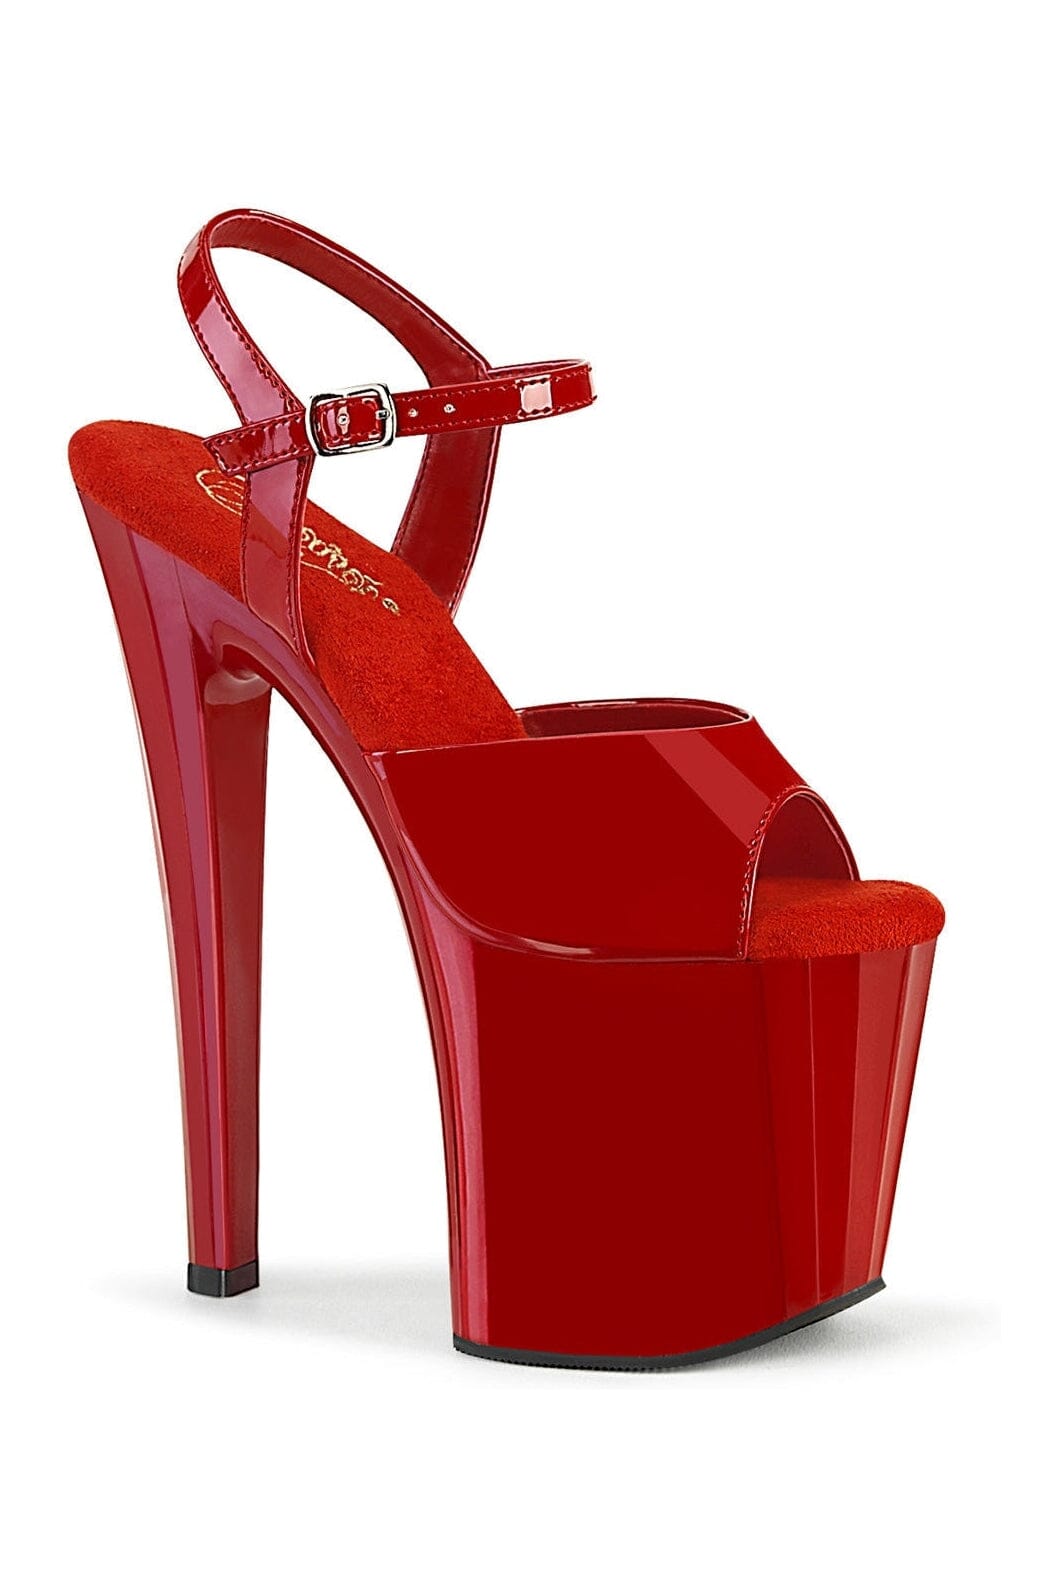 ENCHANT-709 Red Patent Sandal-Sandals-Pleaser-Red-10-Patent-SEXYSHOES.COM